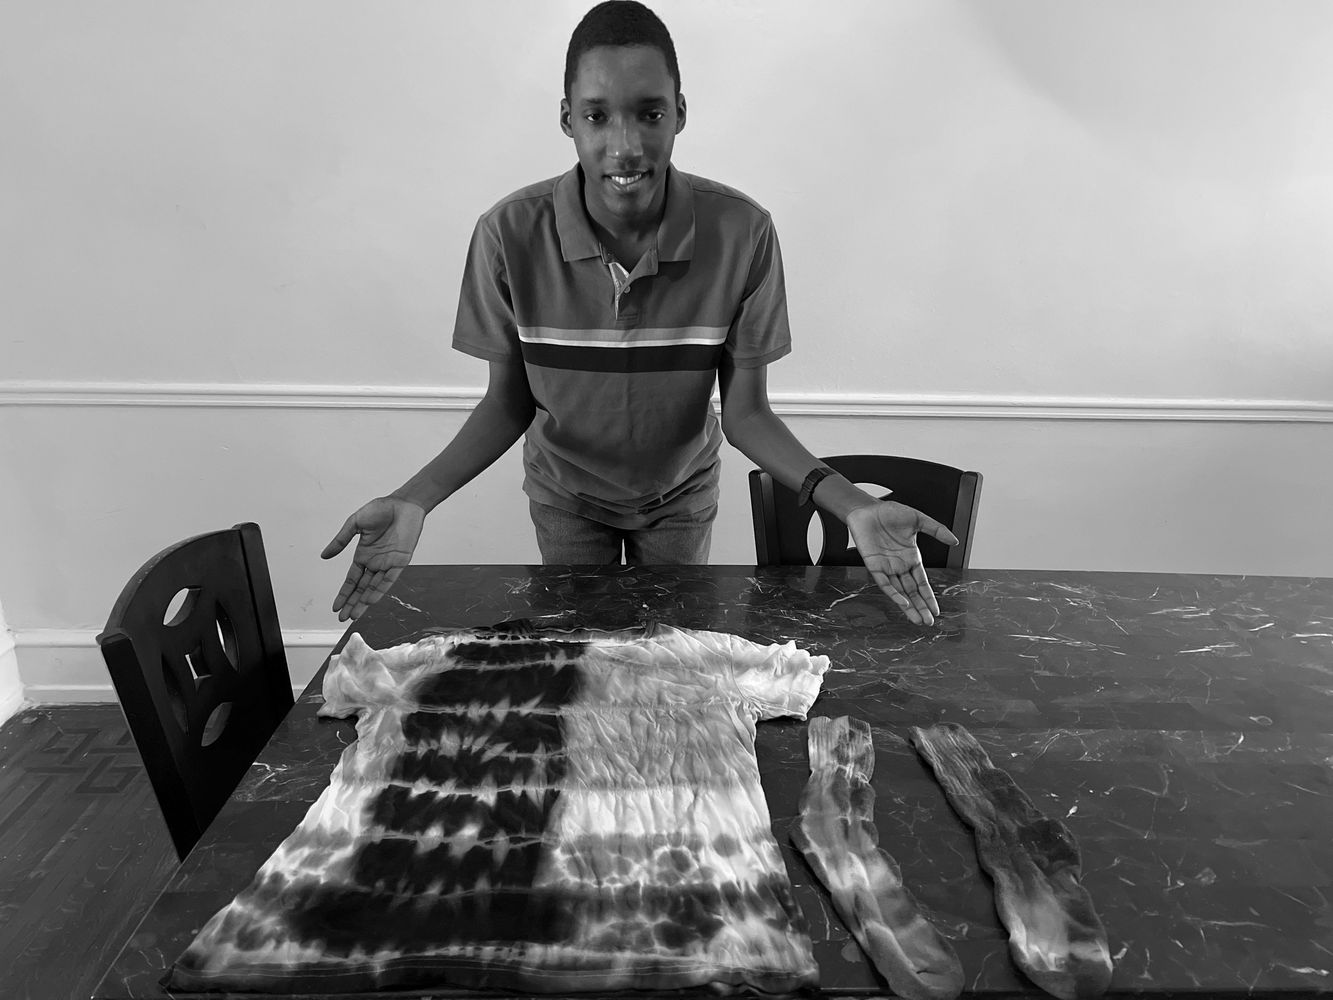 JB presenting some of his artwork on a Tie-dye shirt.